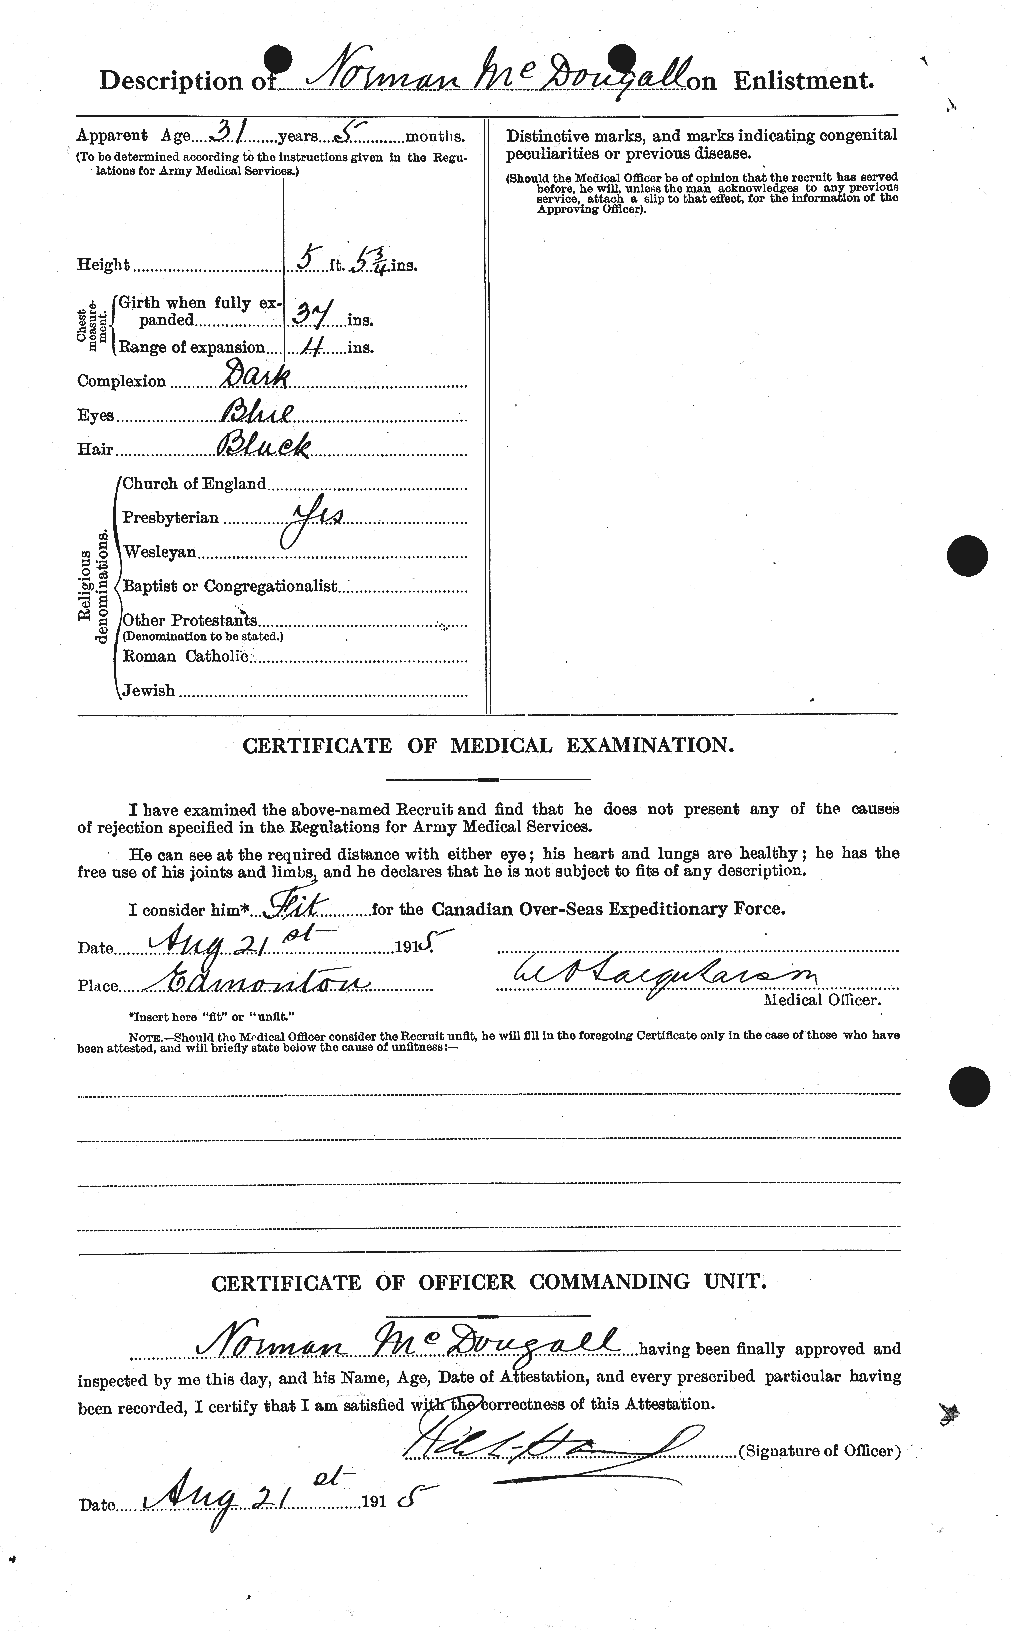 Personnel Records of the First World War - CEF 518344b